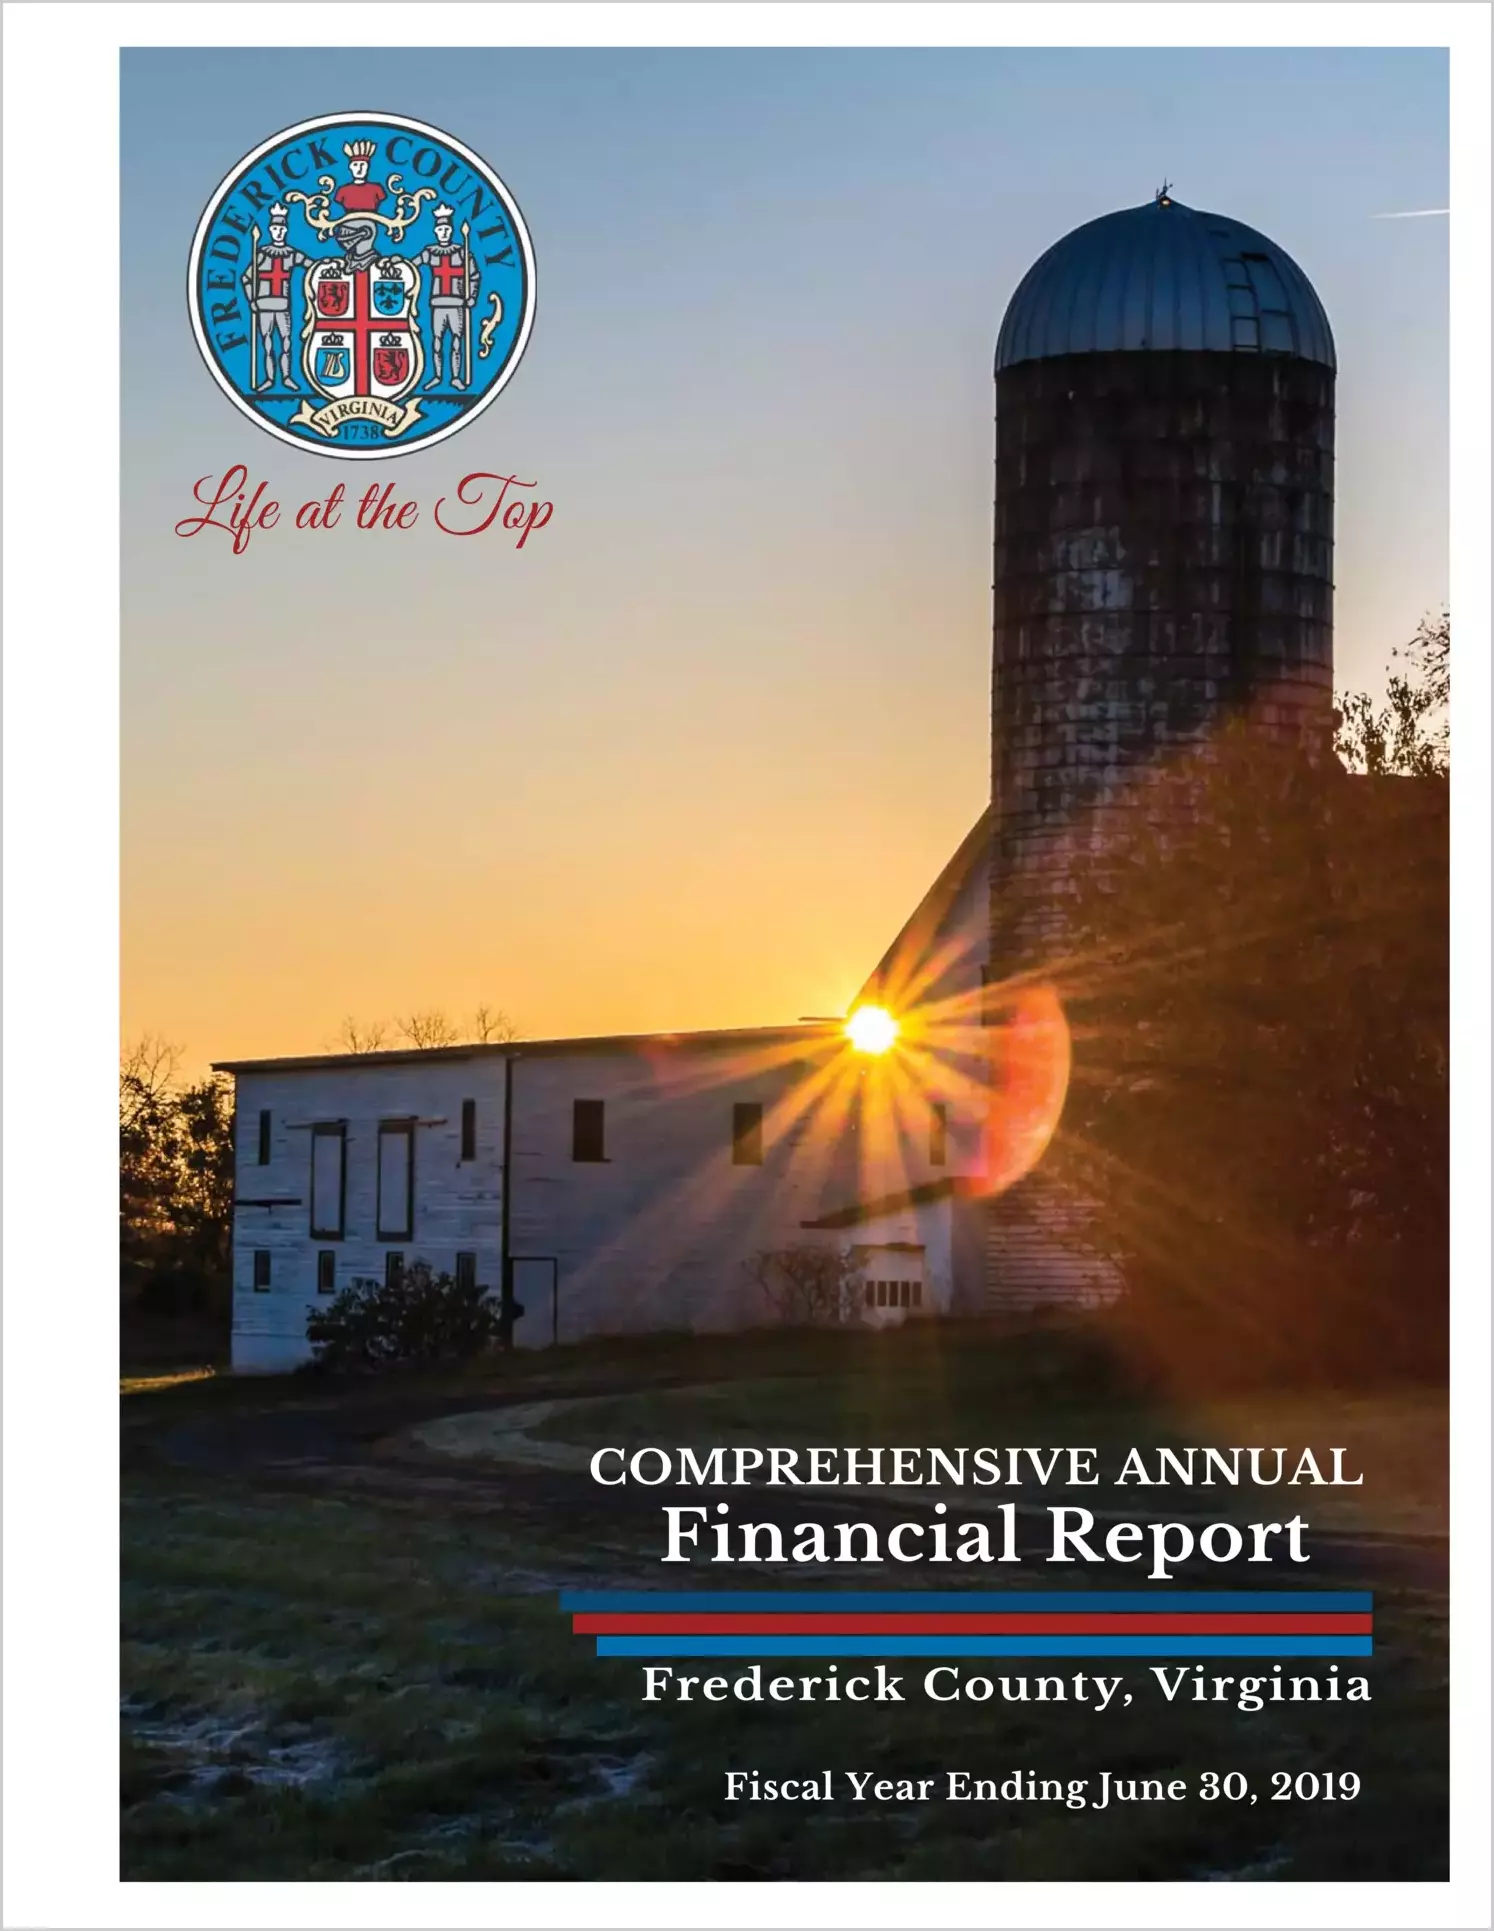 2019 Annual Financial Report for County of Frederick